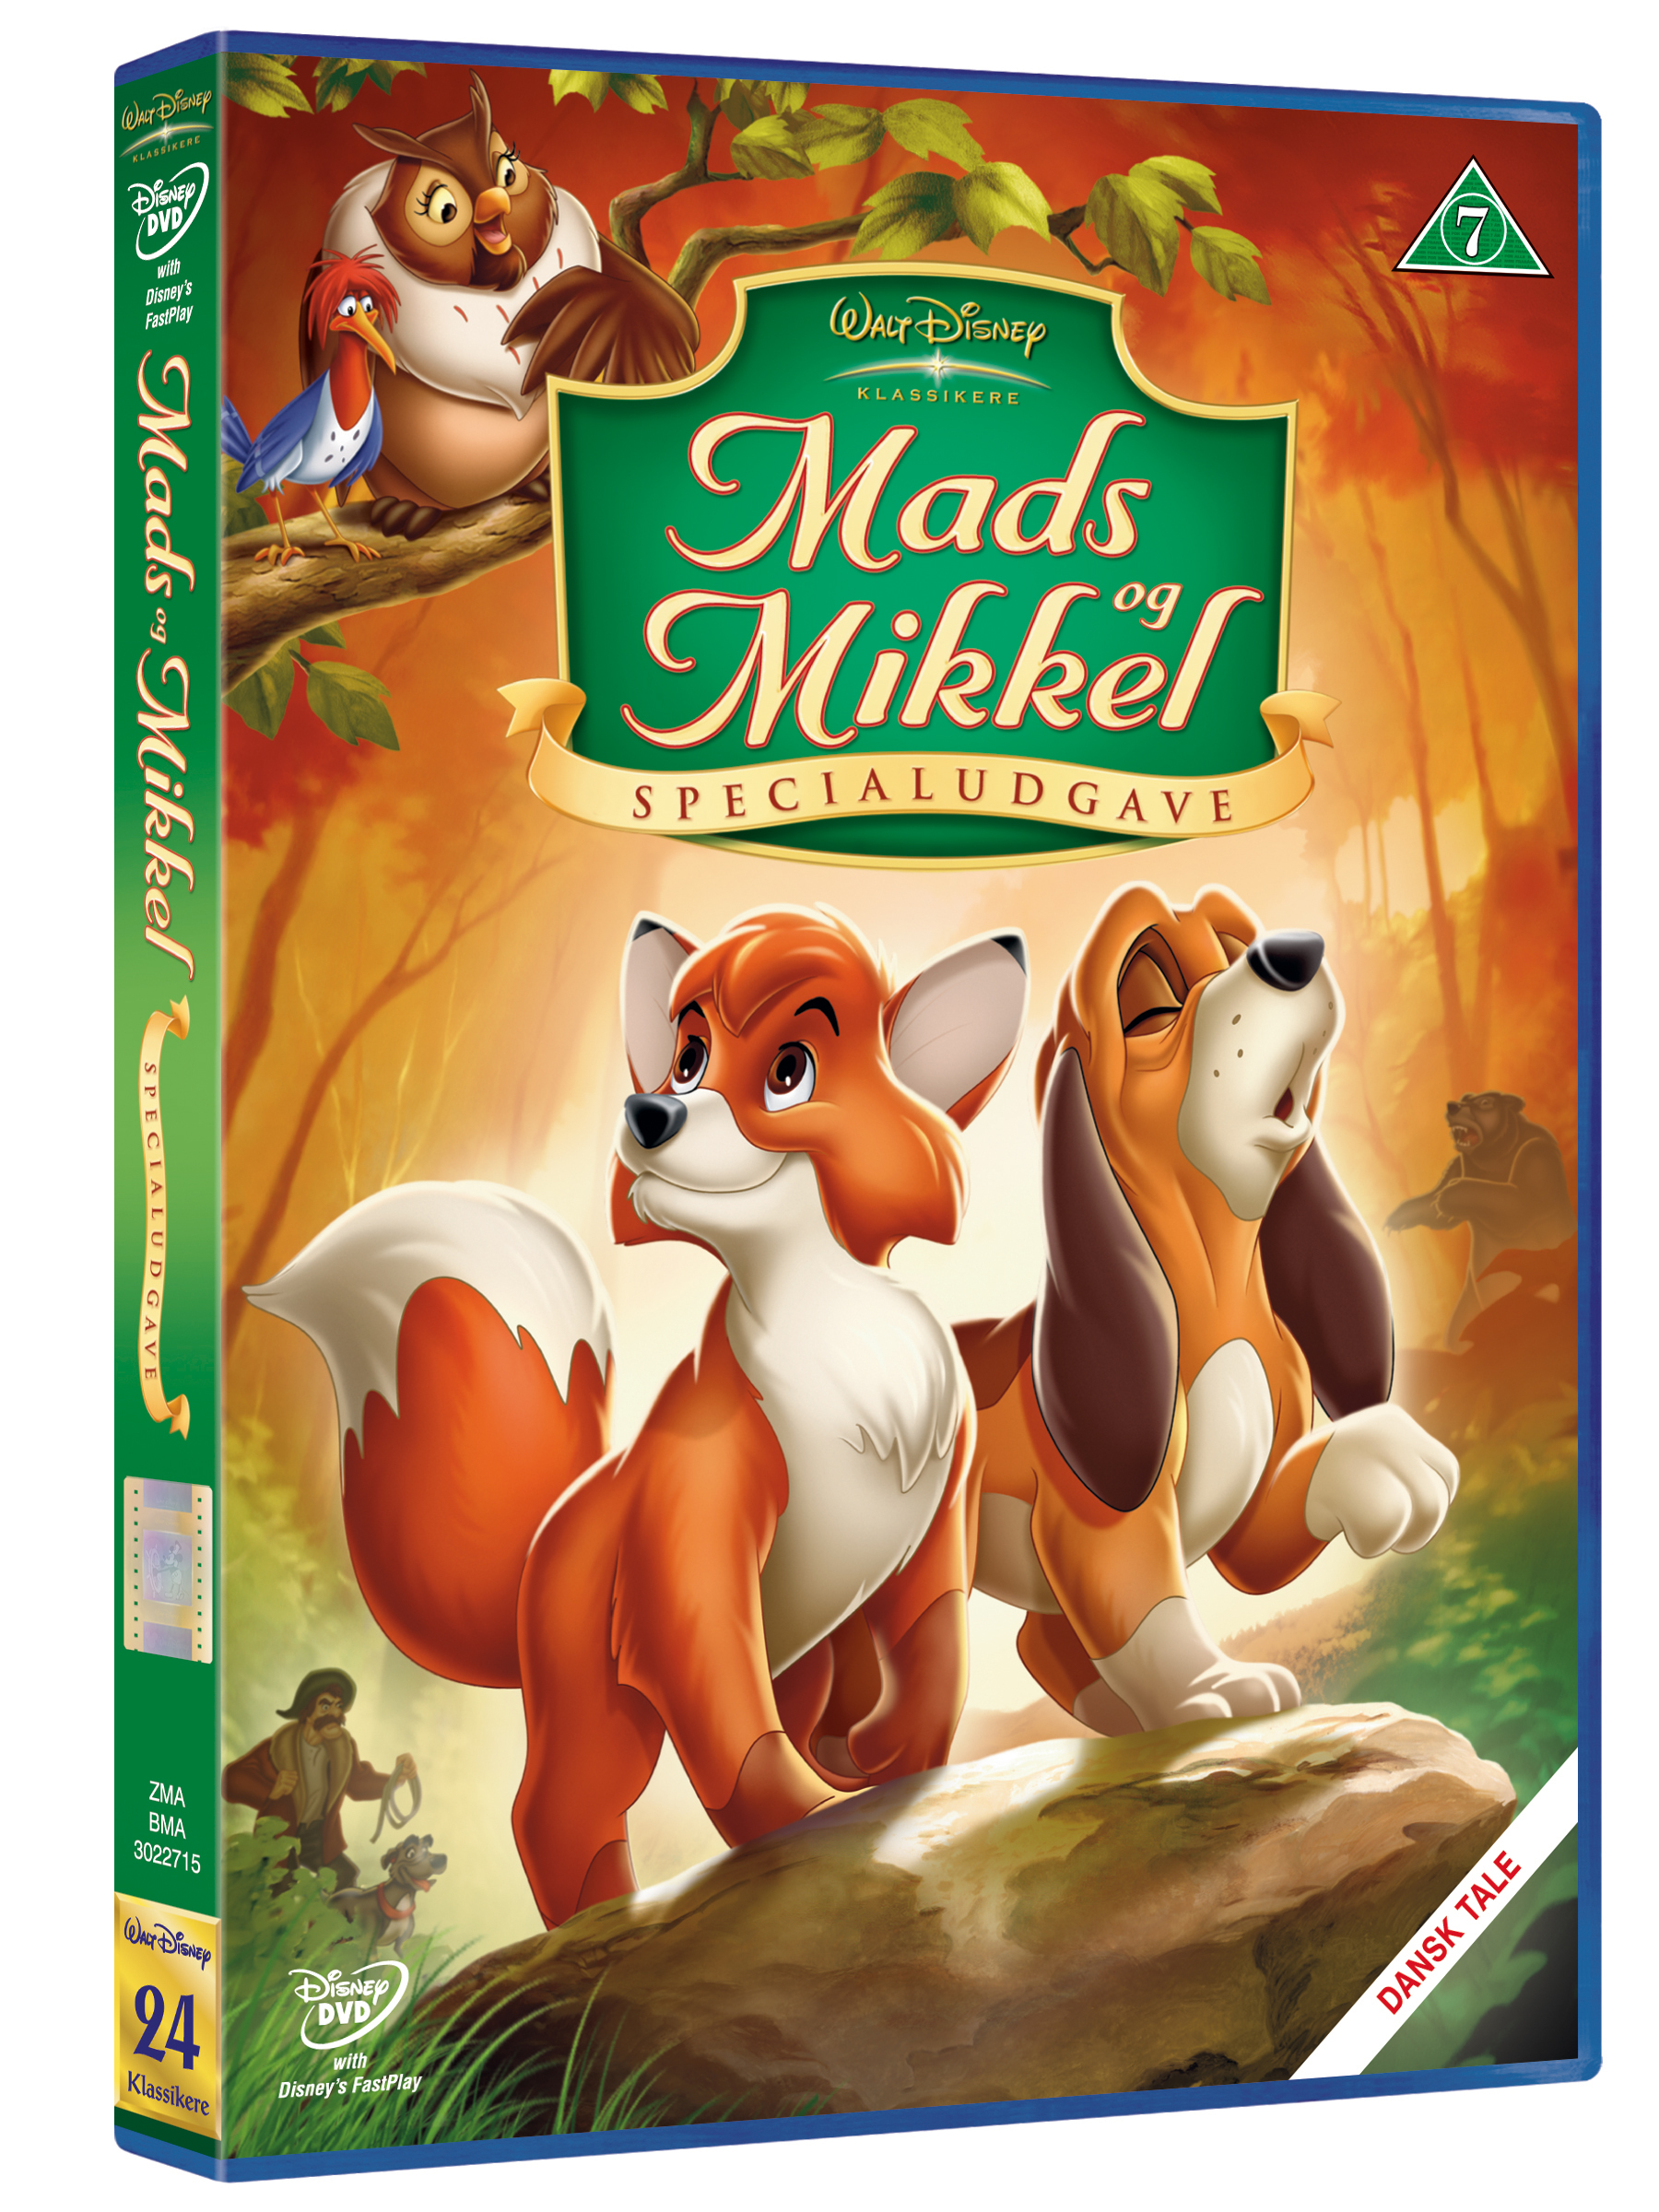 Disneys The Fox and the Hound - DVD